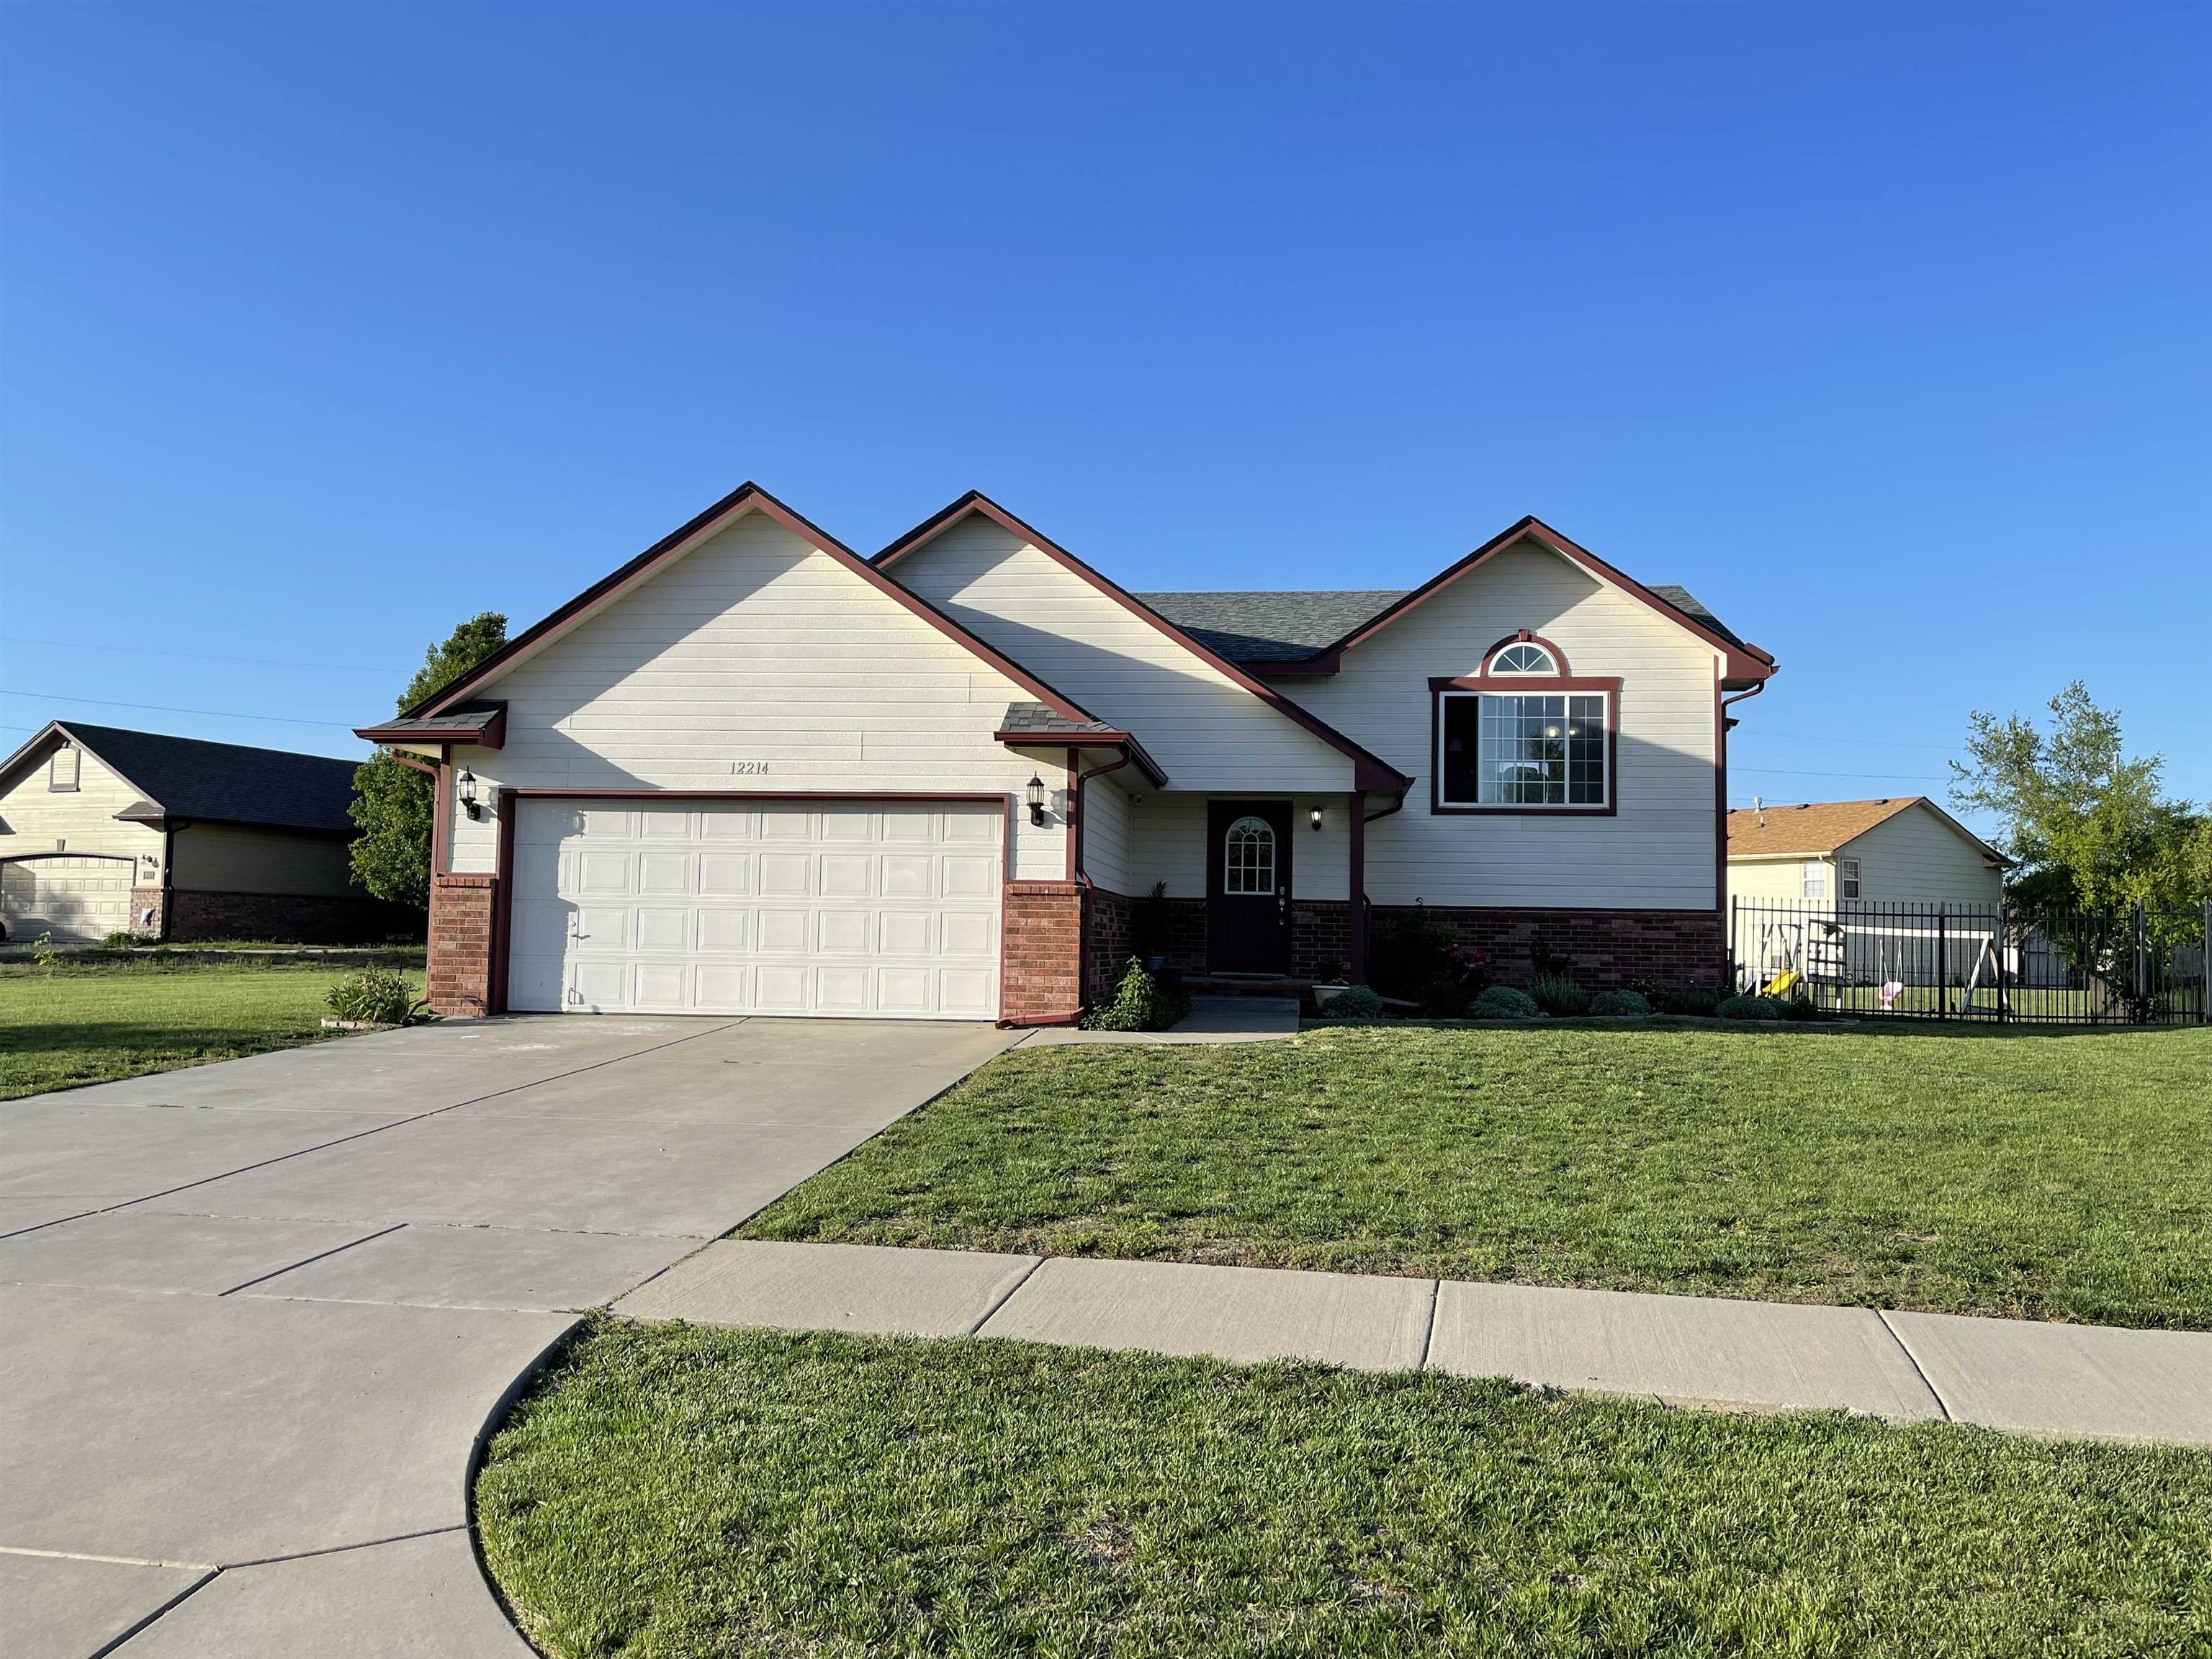 Come see this great home in SE Wichita! This home is located close to shopping, conveniently located